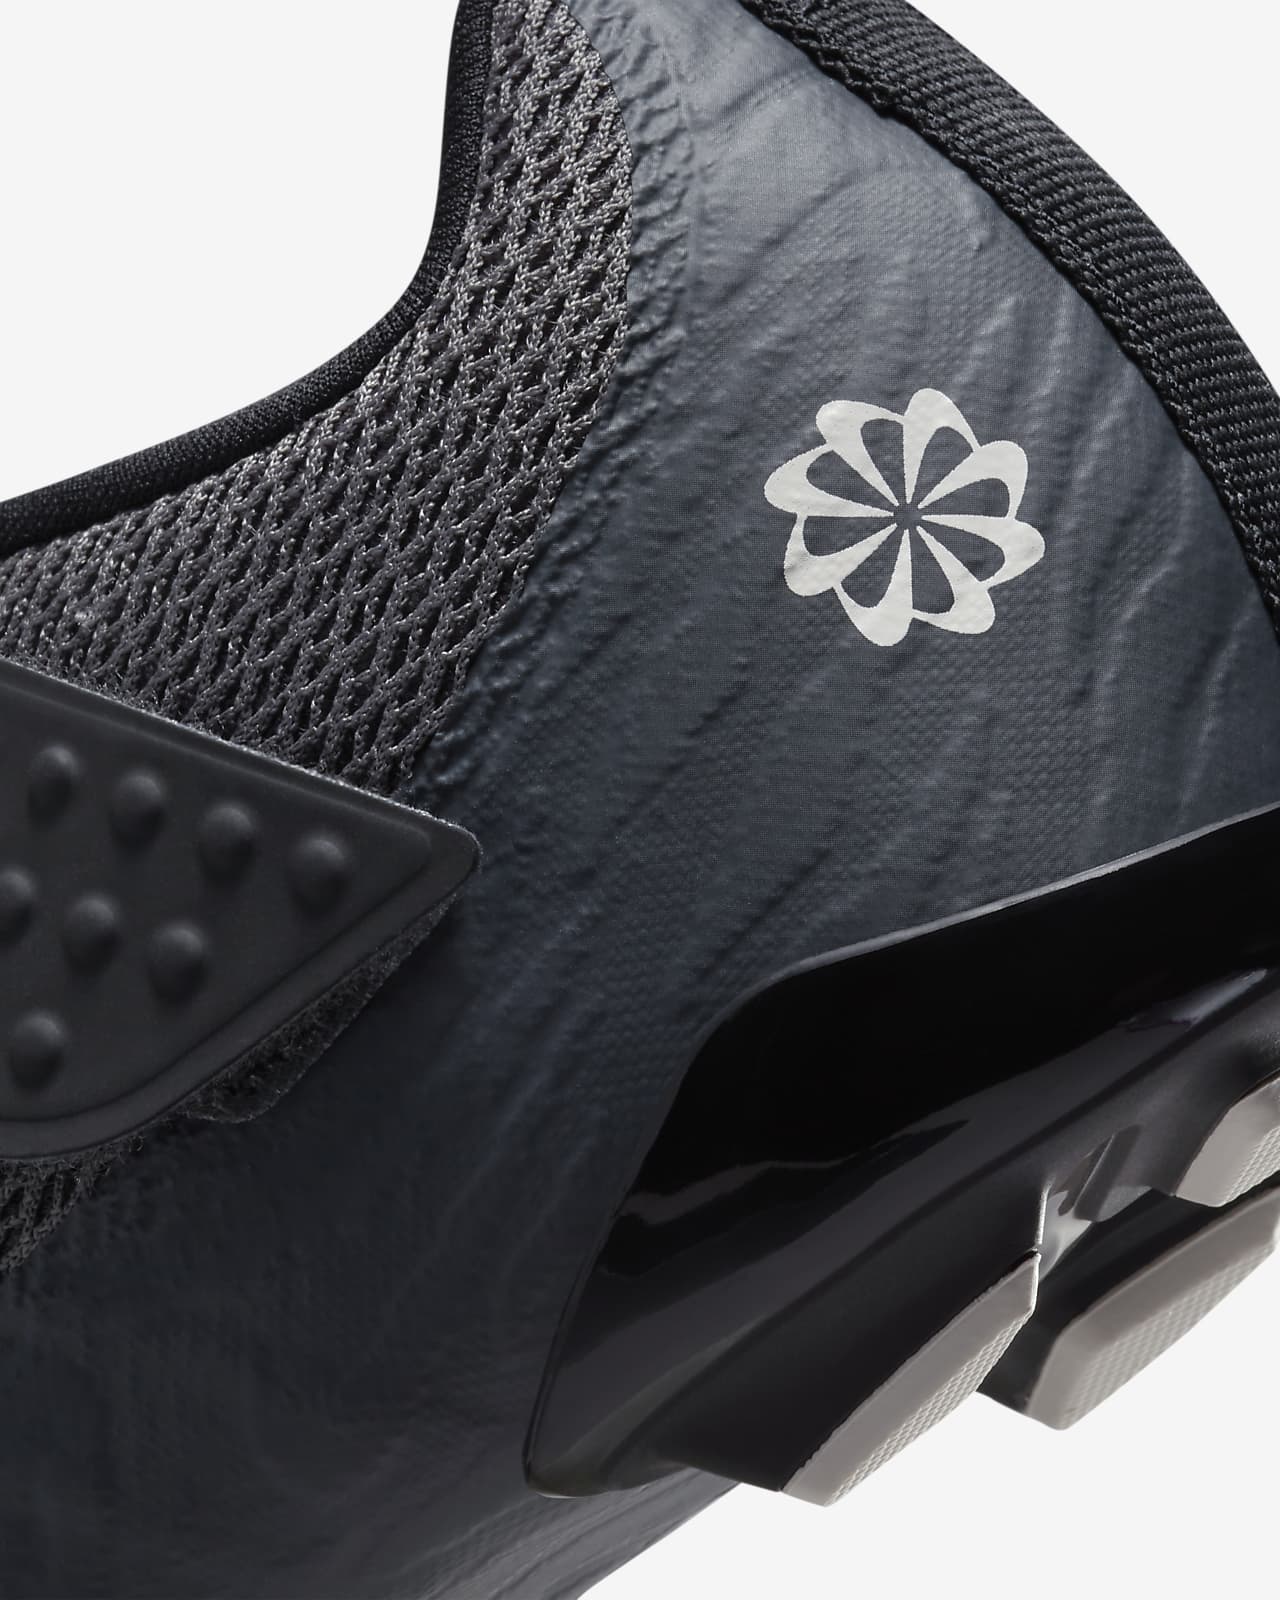 Nike SuperRep Cycle 2 Next Nature Indoor Cycling Shoes. Nike IL